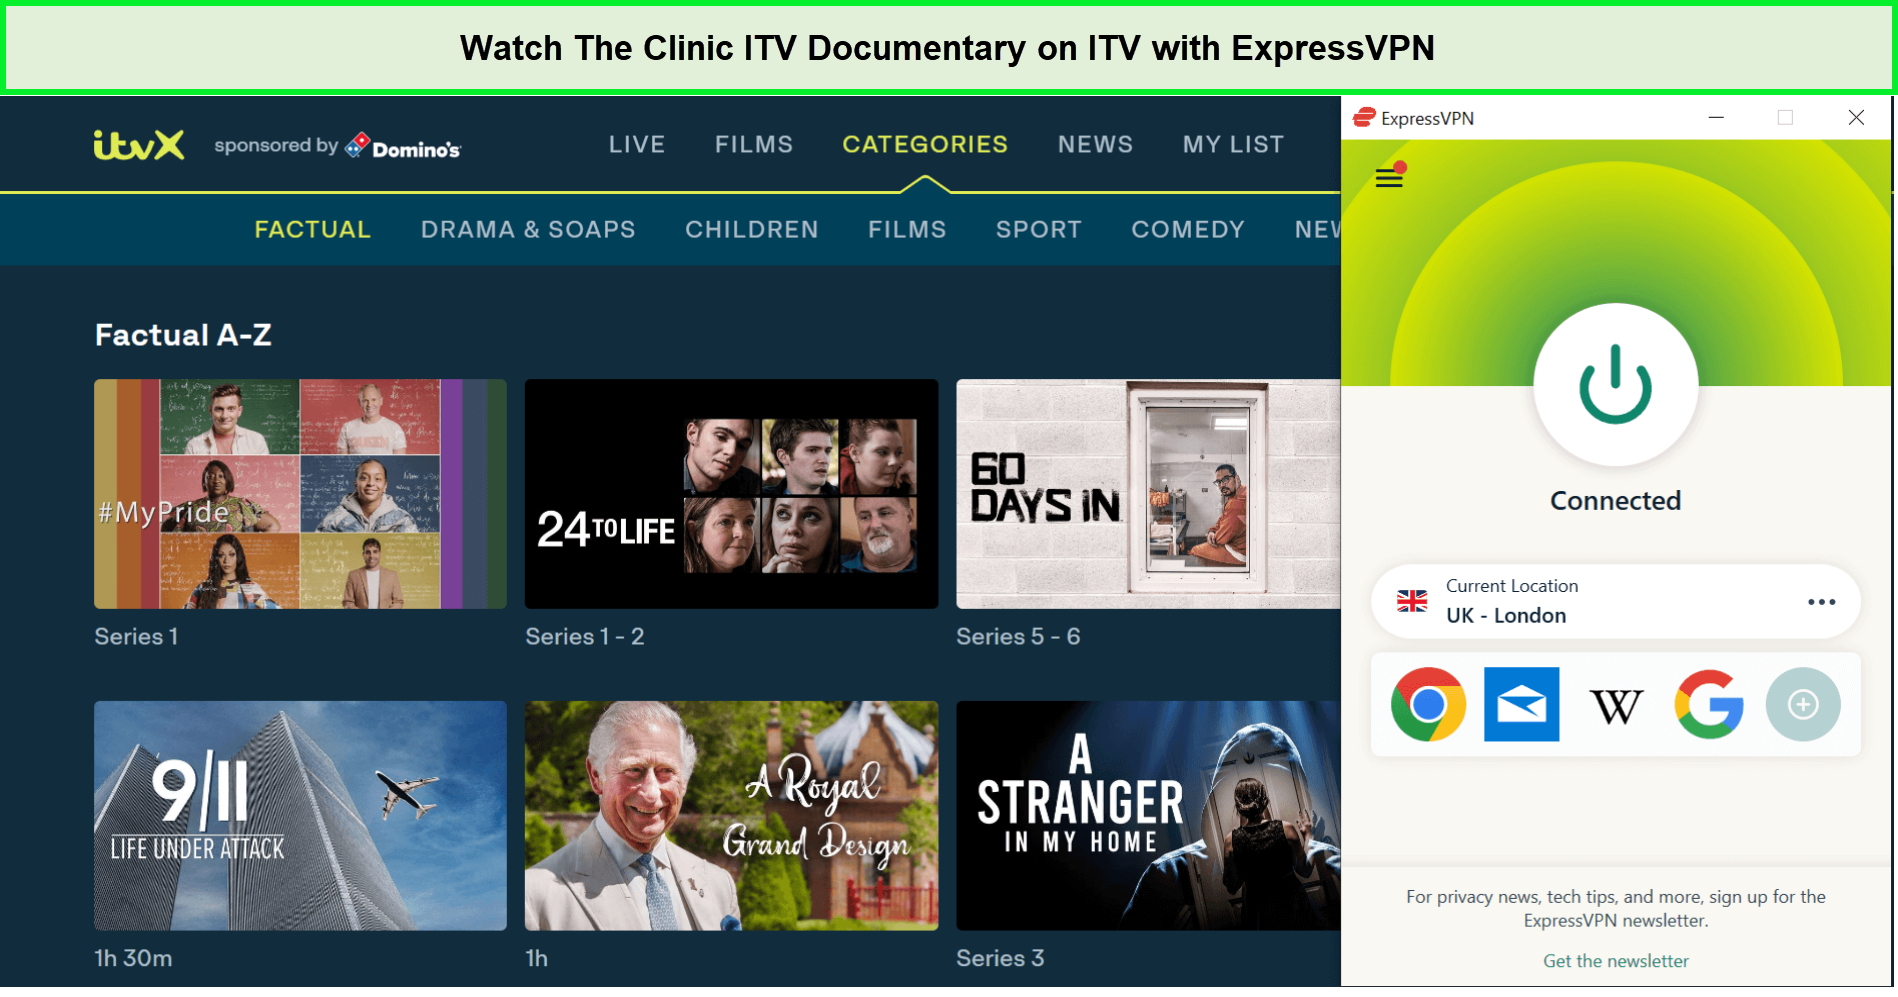 Watch-The-Clinic-ITV-Documentary-in-Hong Kong-on-ITV-with-ExpressVPN.